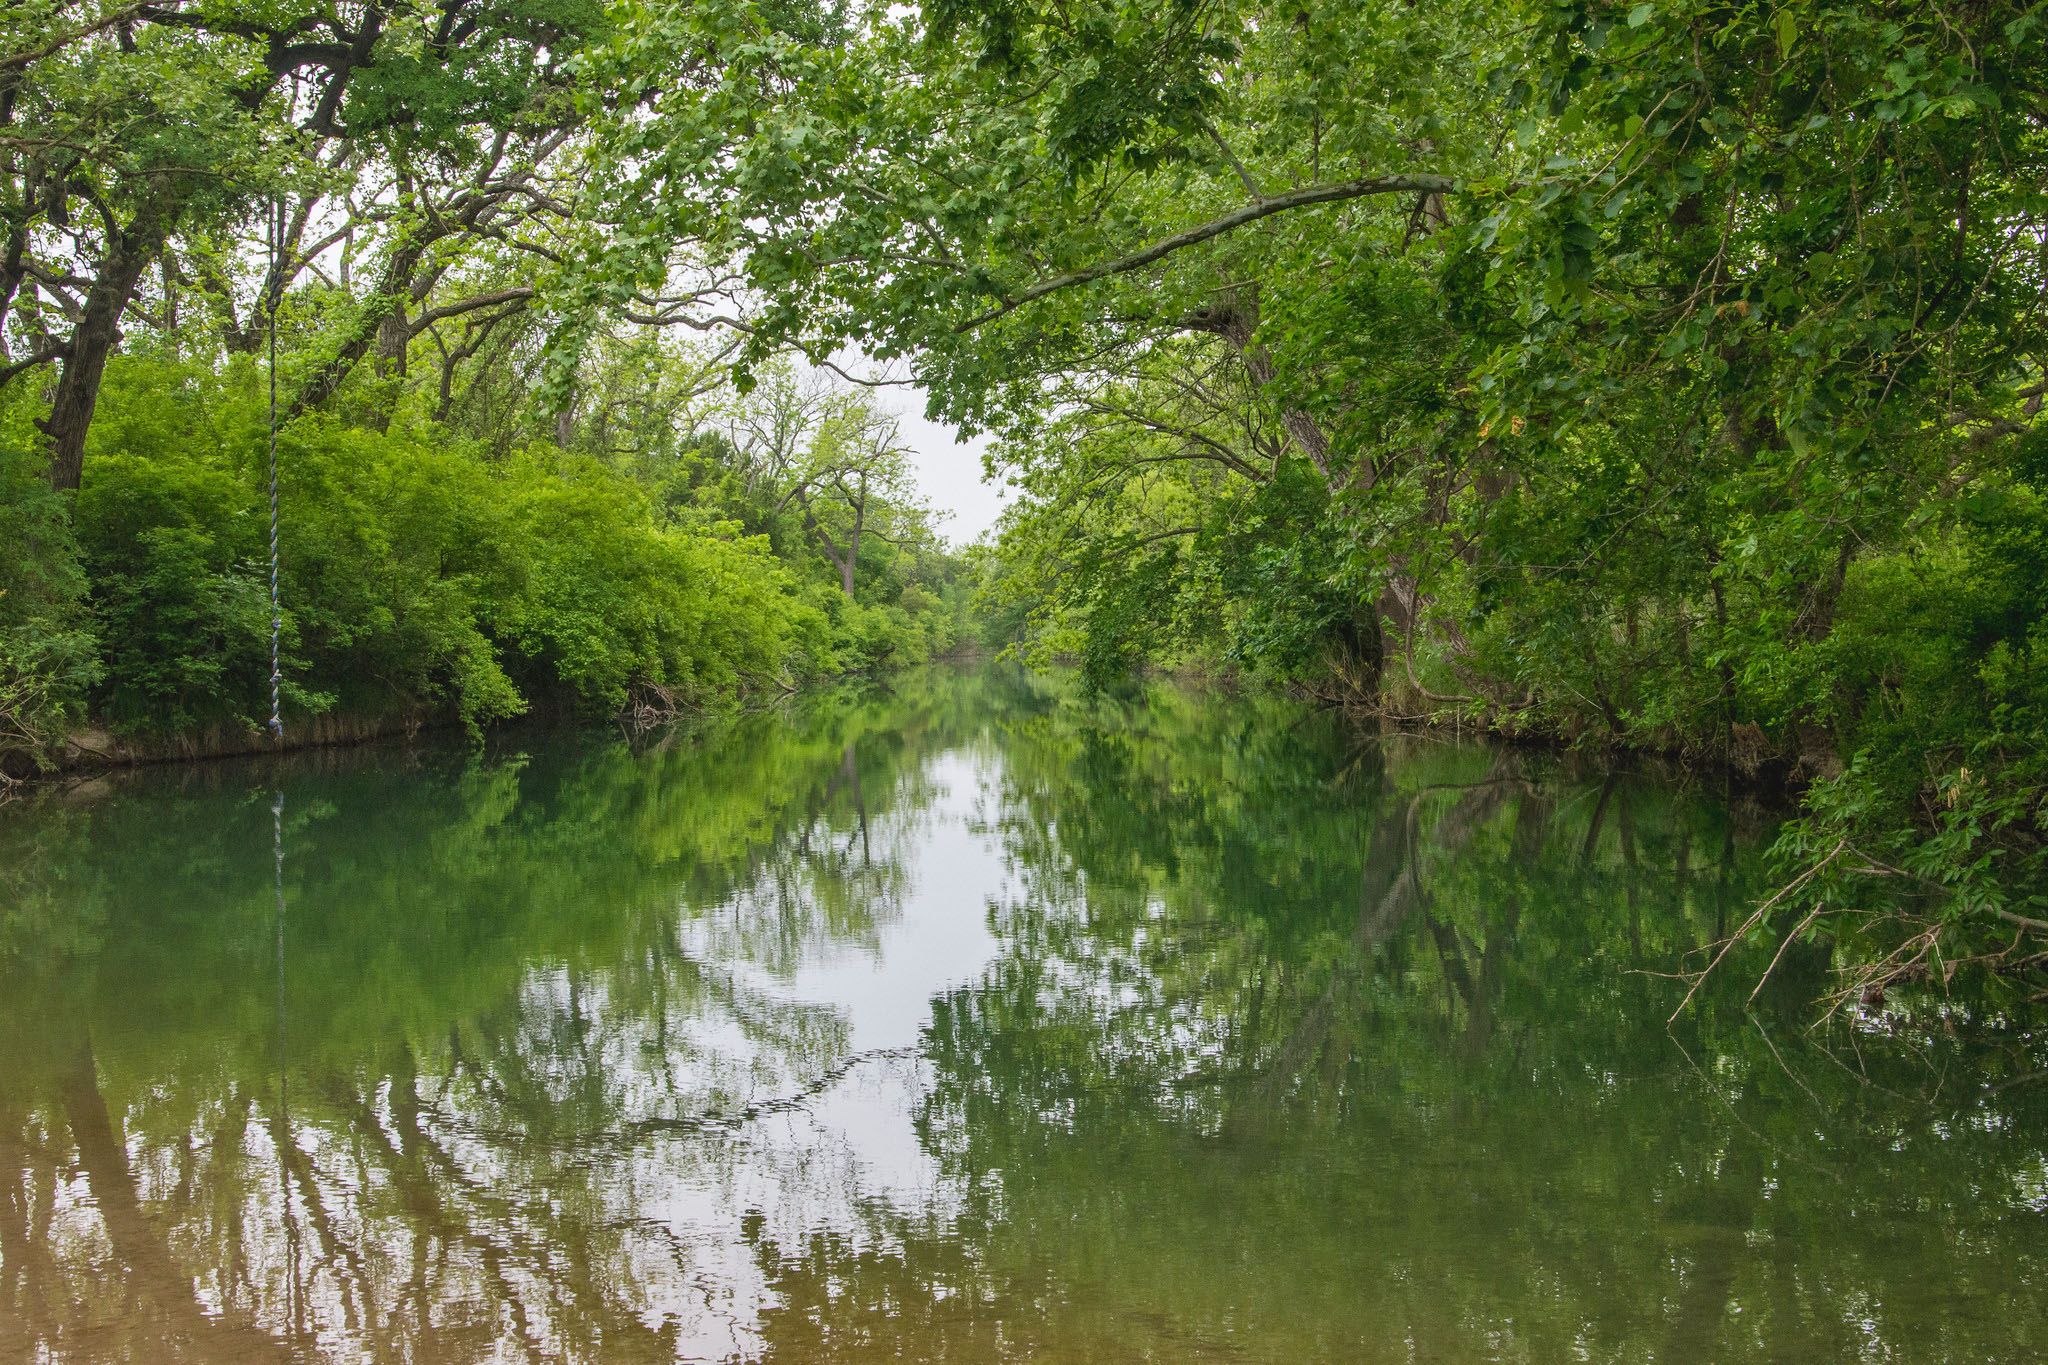 A creek reflects the green foliage that lines it.